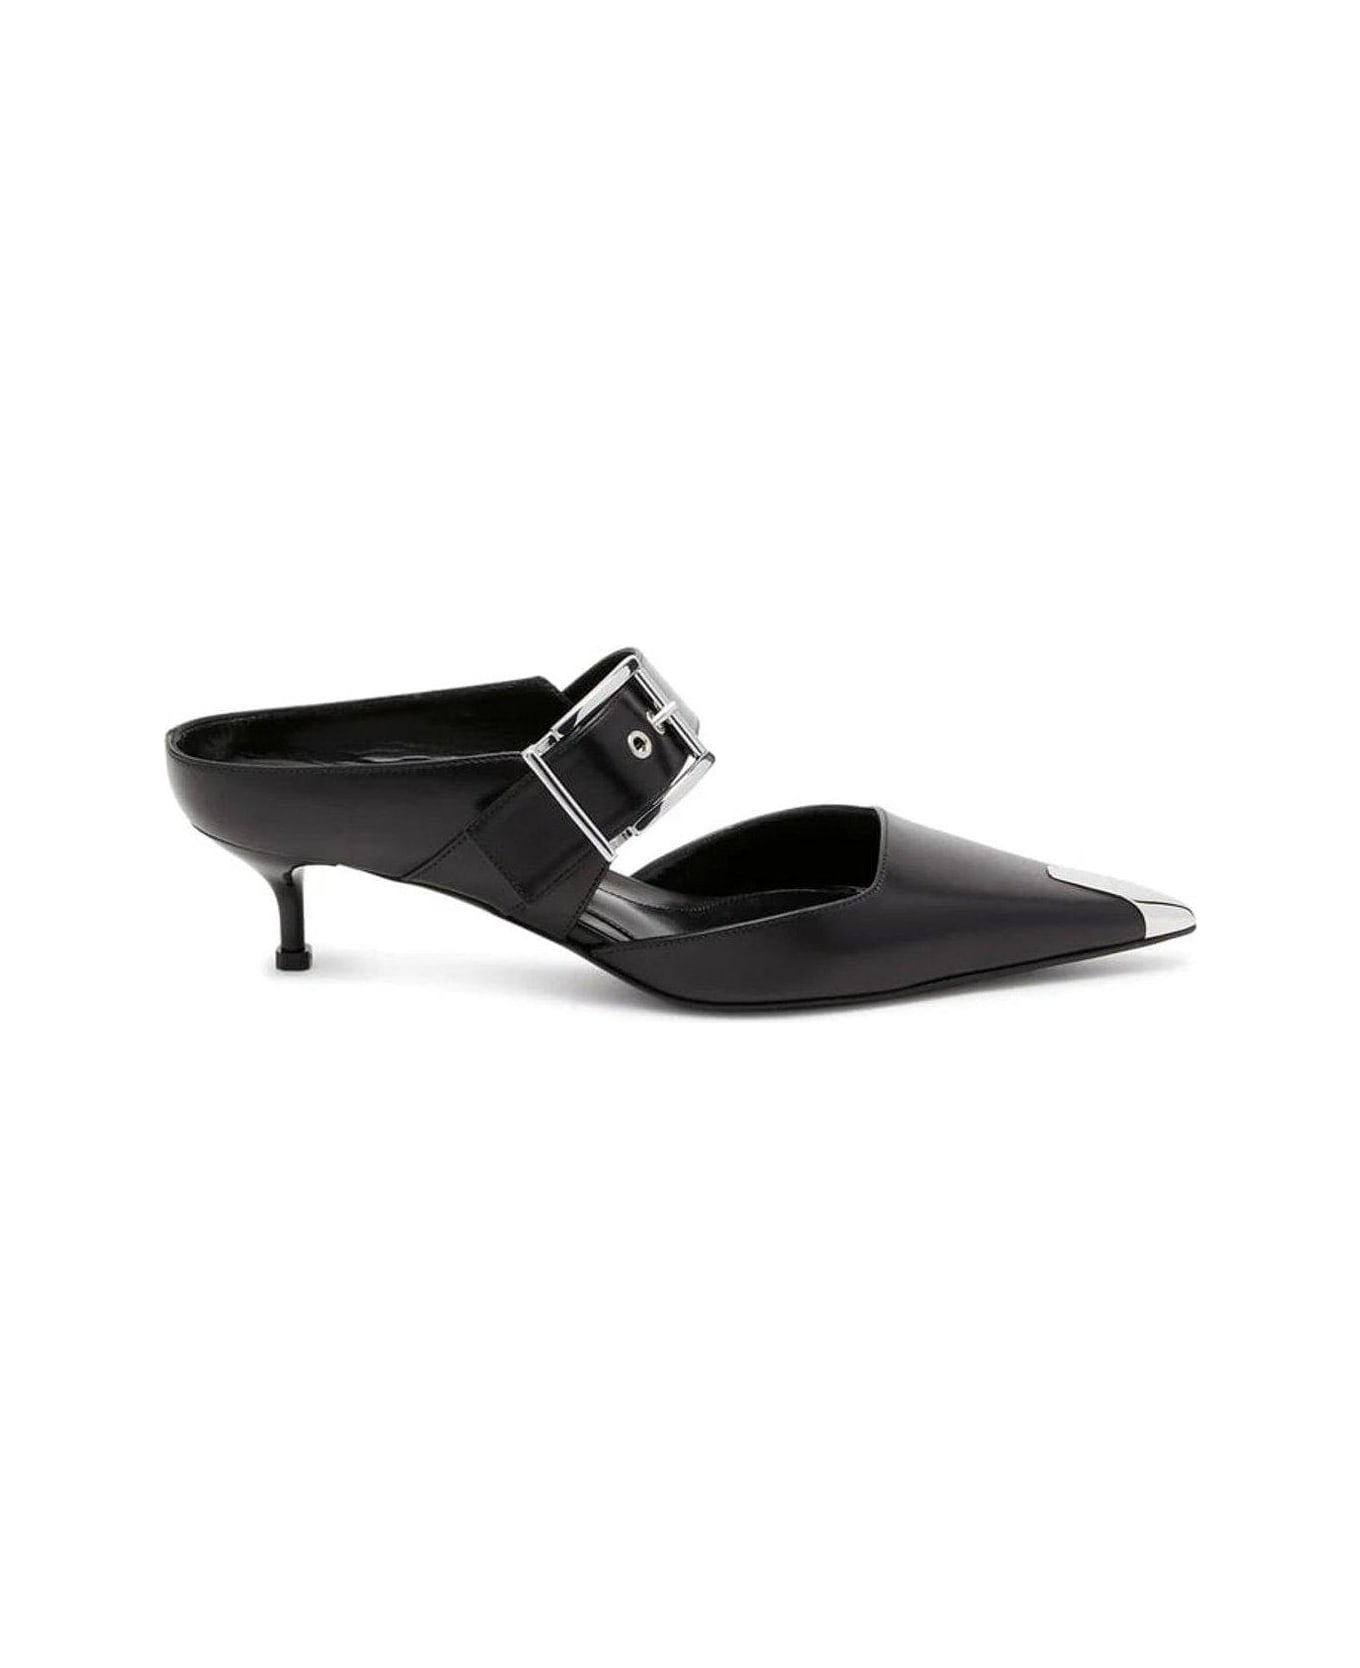 Alexander McQueen Punk Buckle Pointed Toe Mules - Black Silver